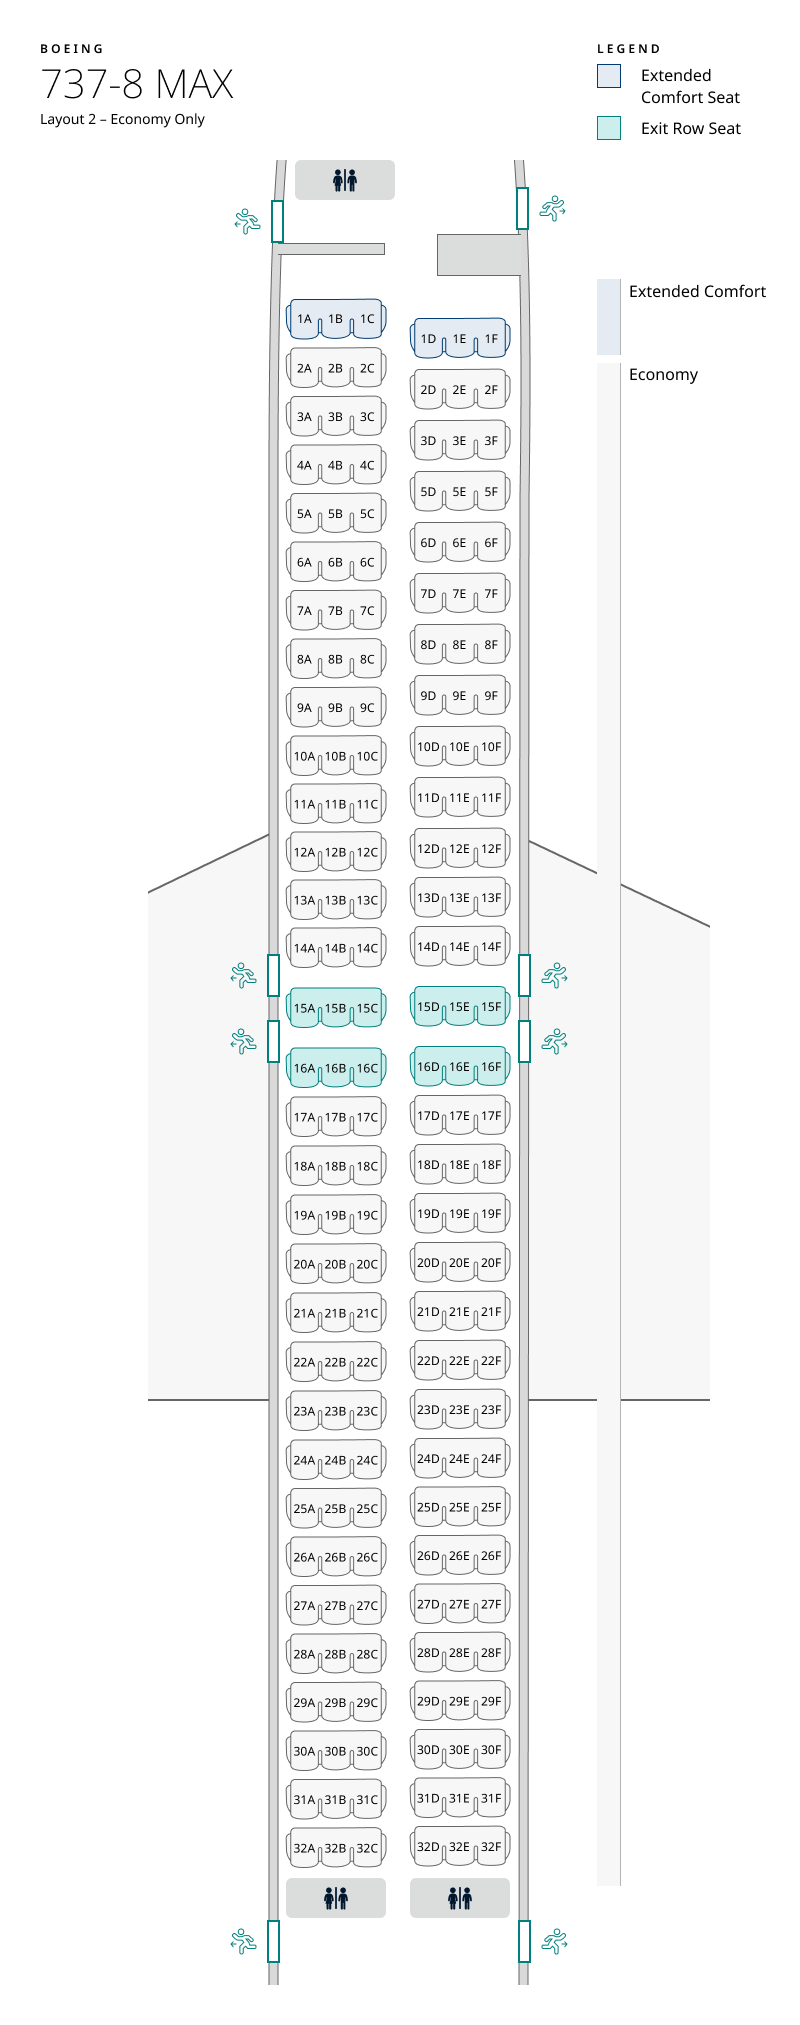 Seat map of 737-8 MAX layout 2 – Economy only. Seat information available in table below